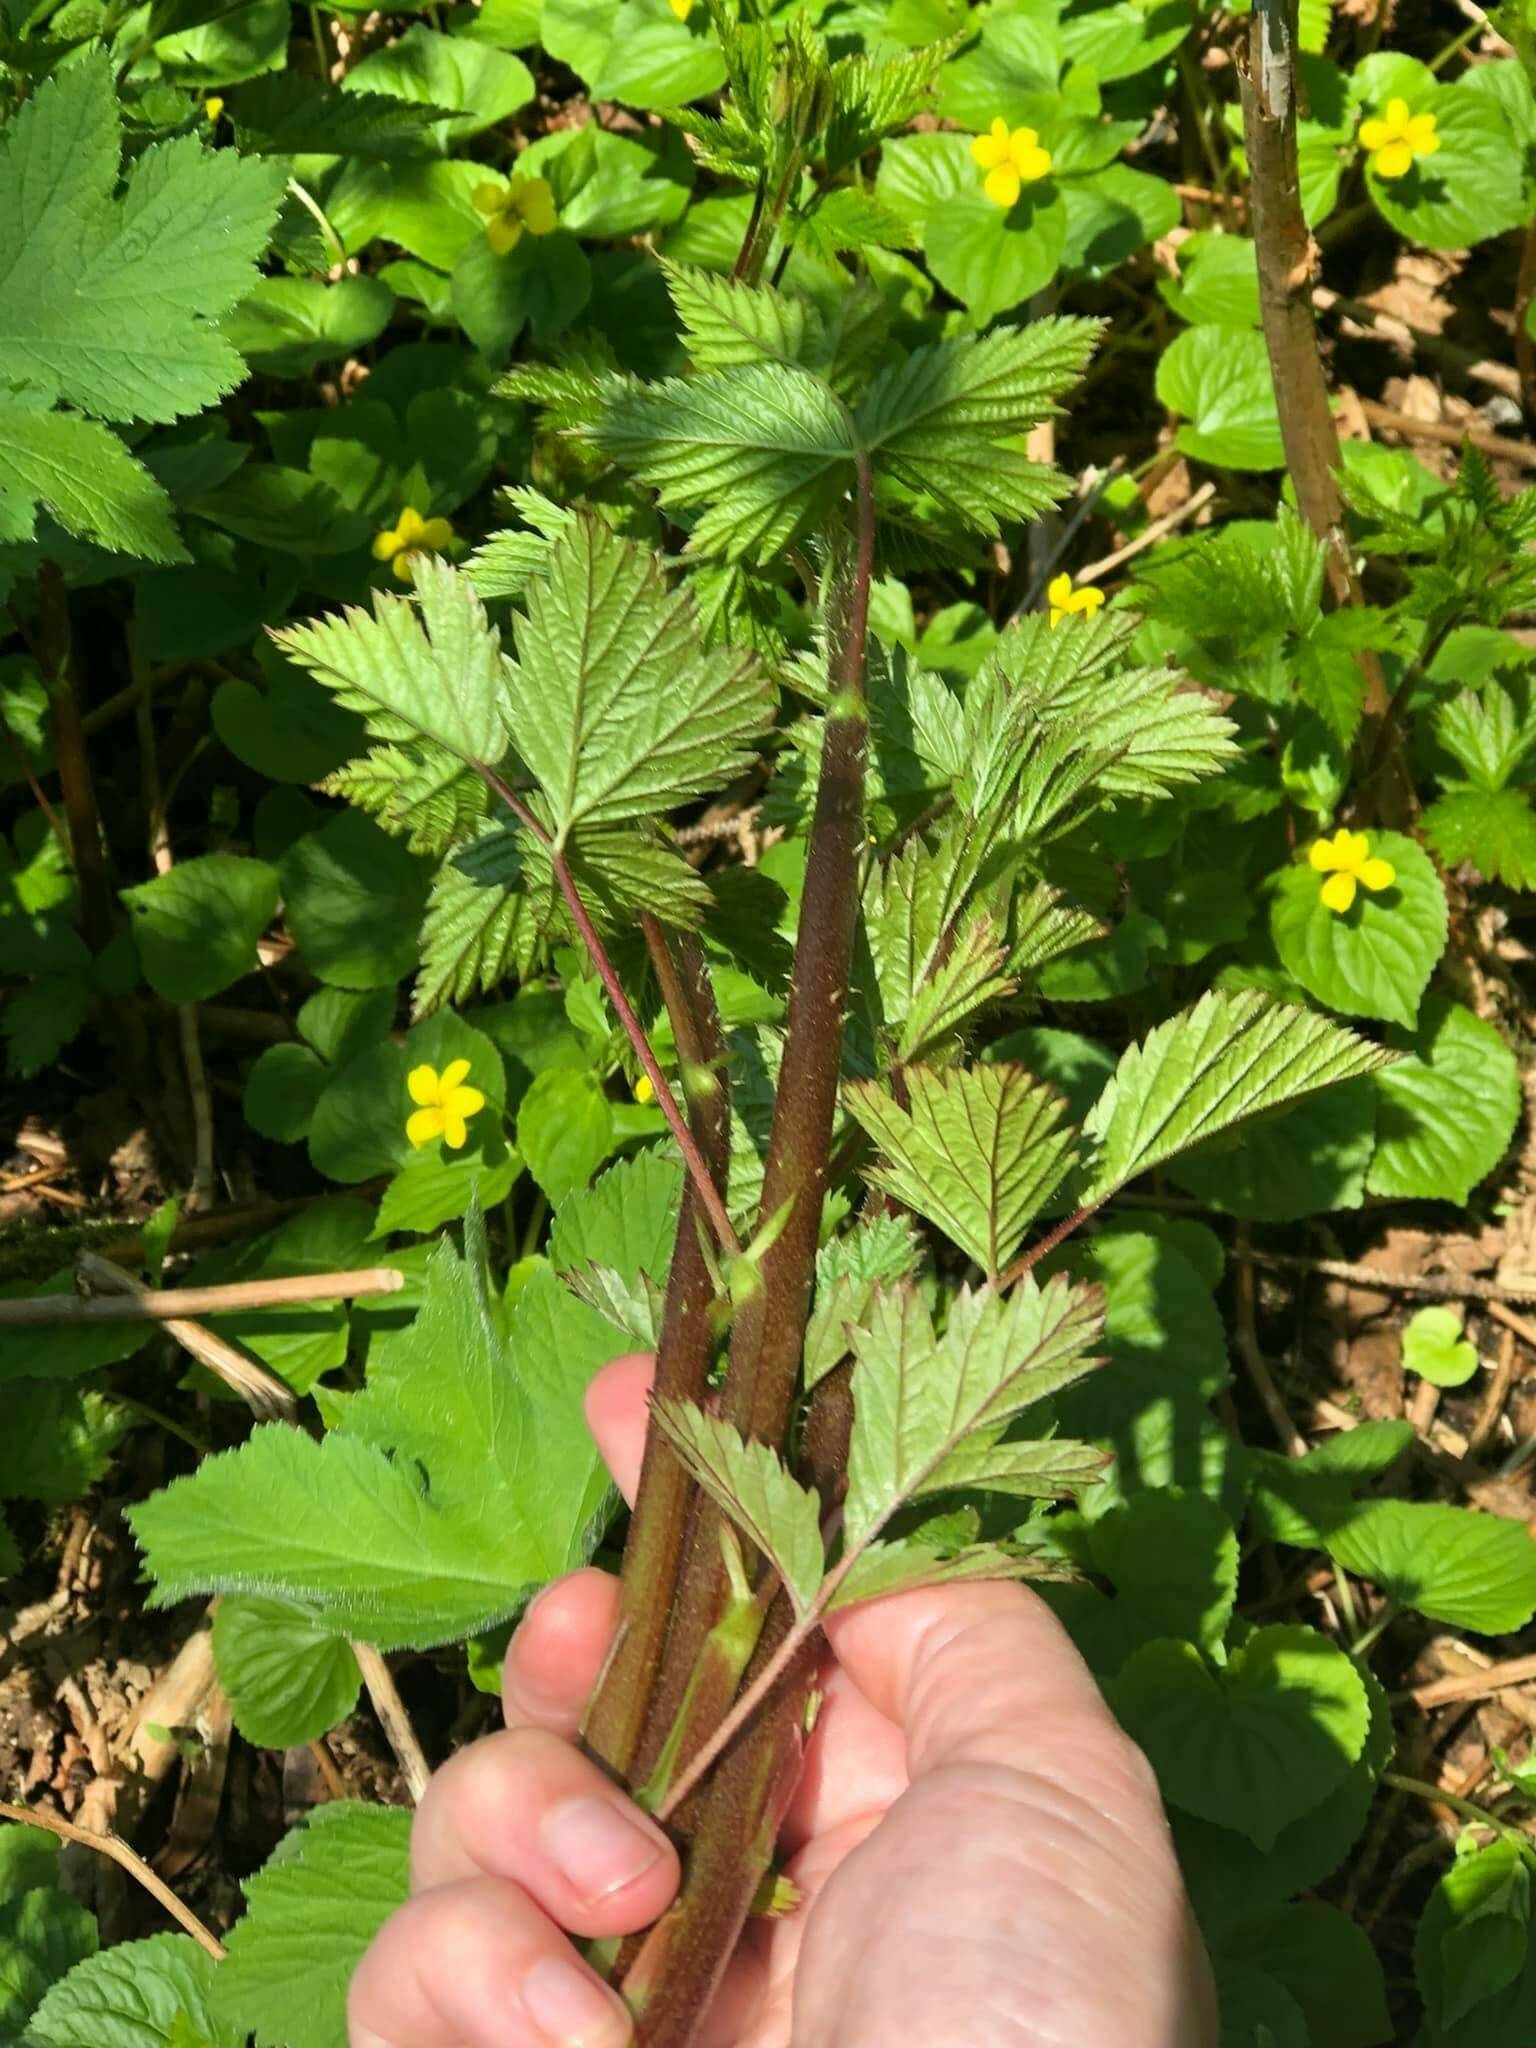 This photo shows salmonberry shoots.